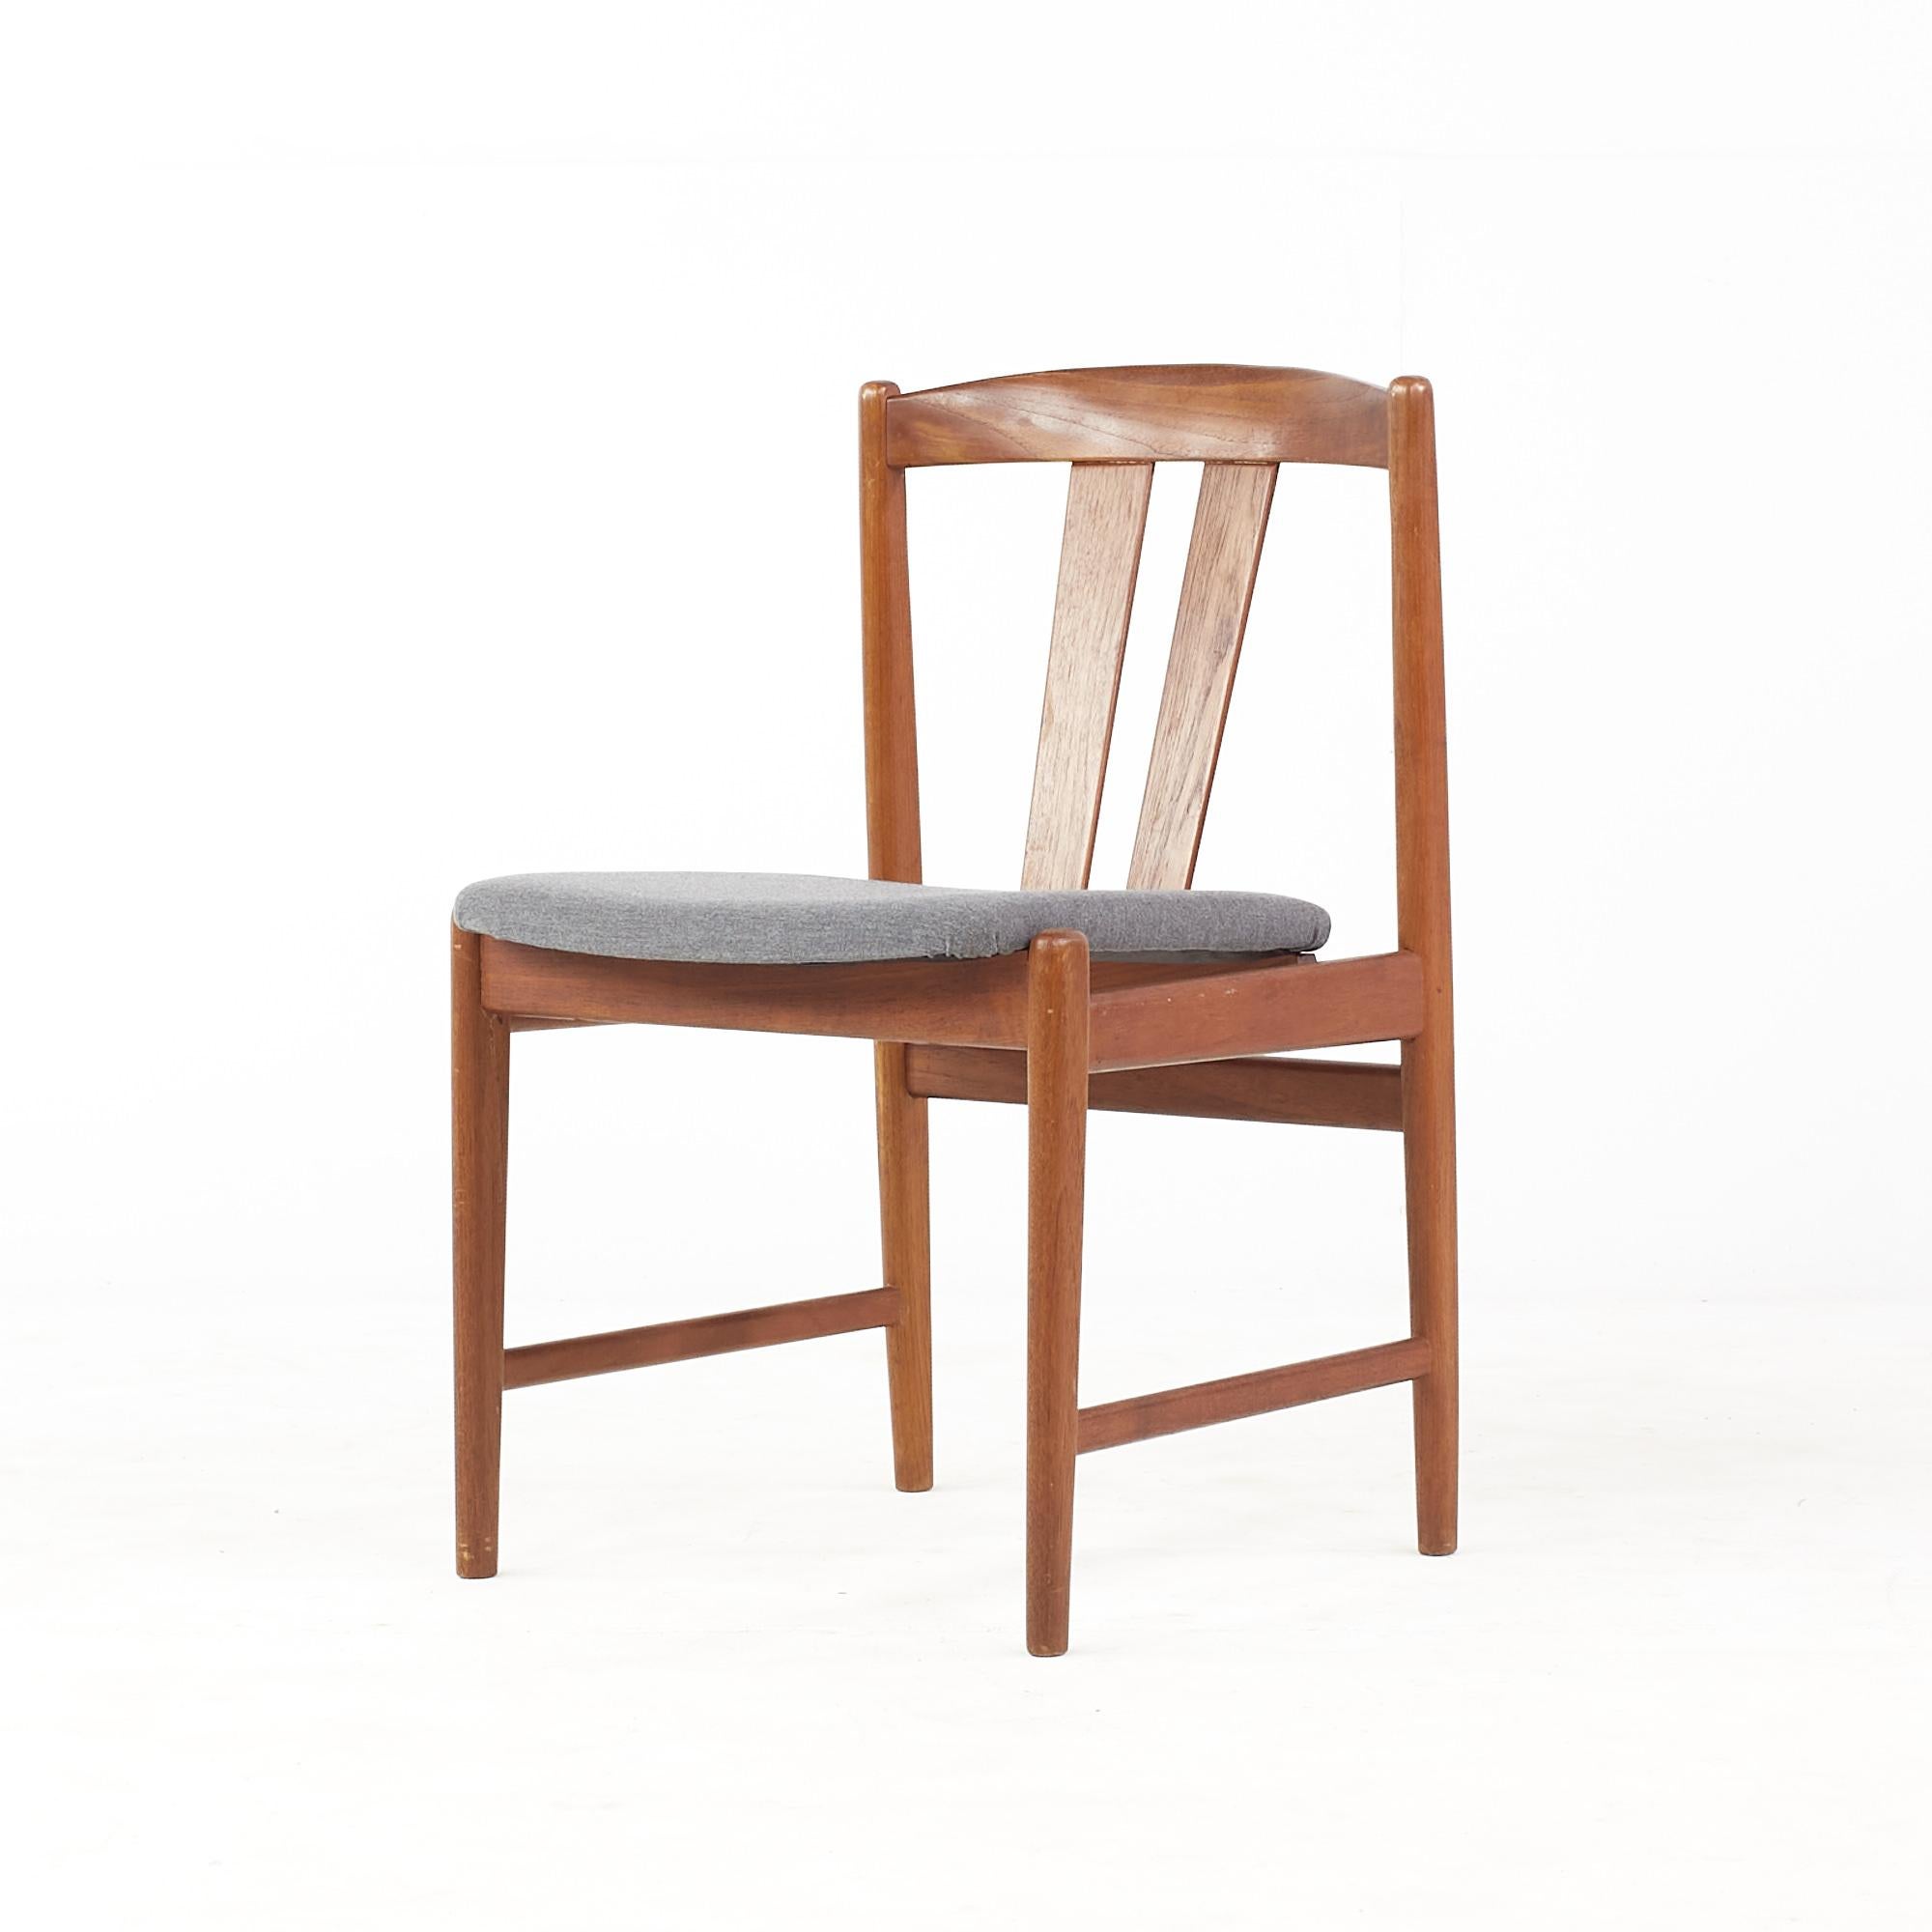 Late 20th Century Folke Ohlsson for Dux Mid Century Teak Wishbone Dining Chairs - Set of 4 For Sale